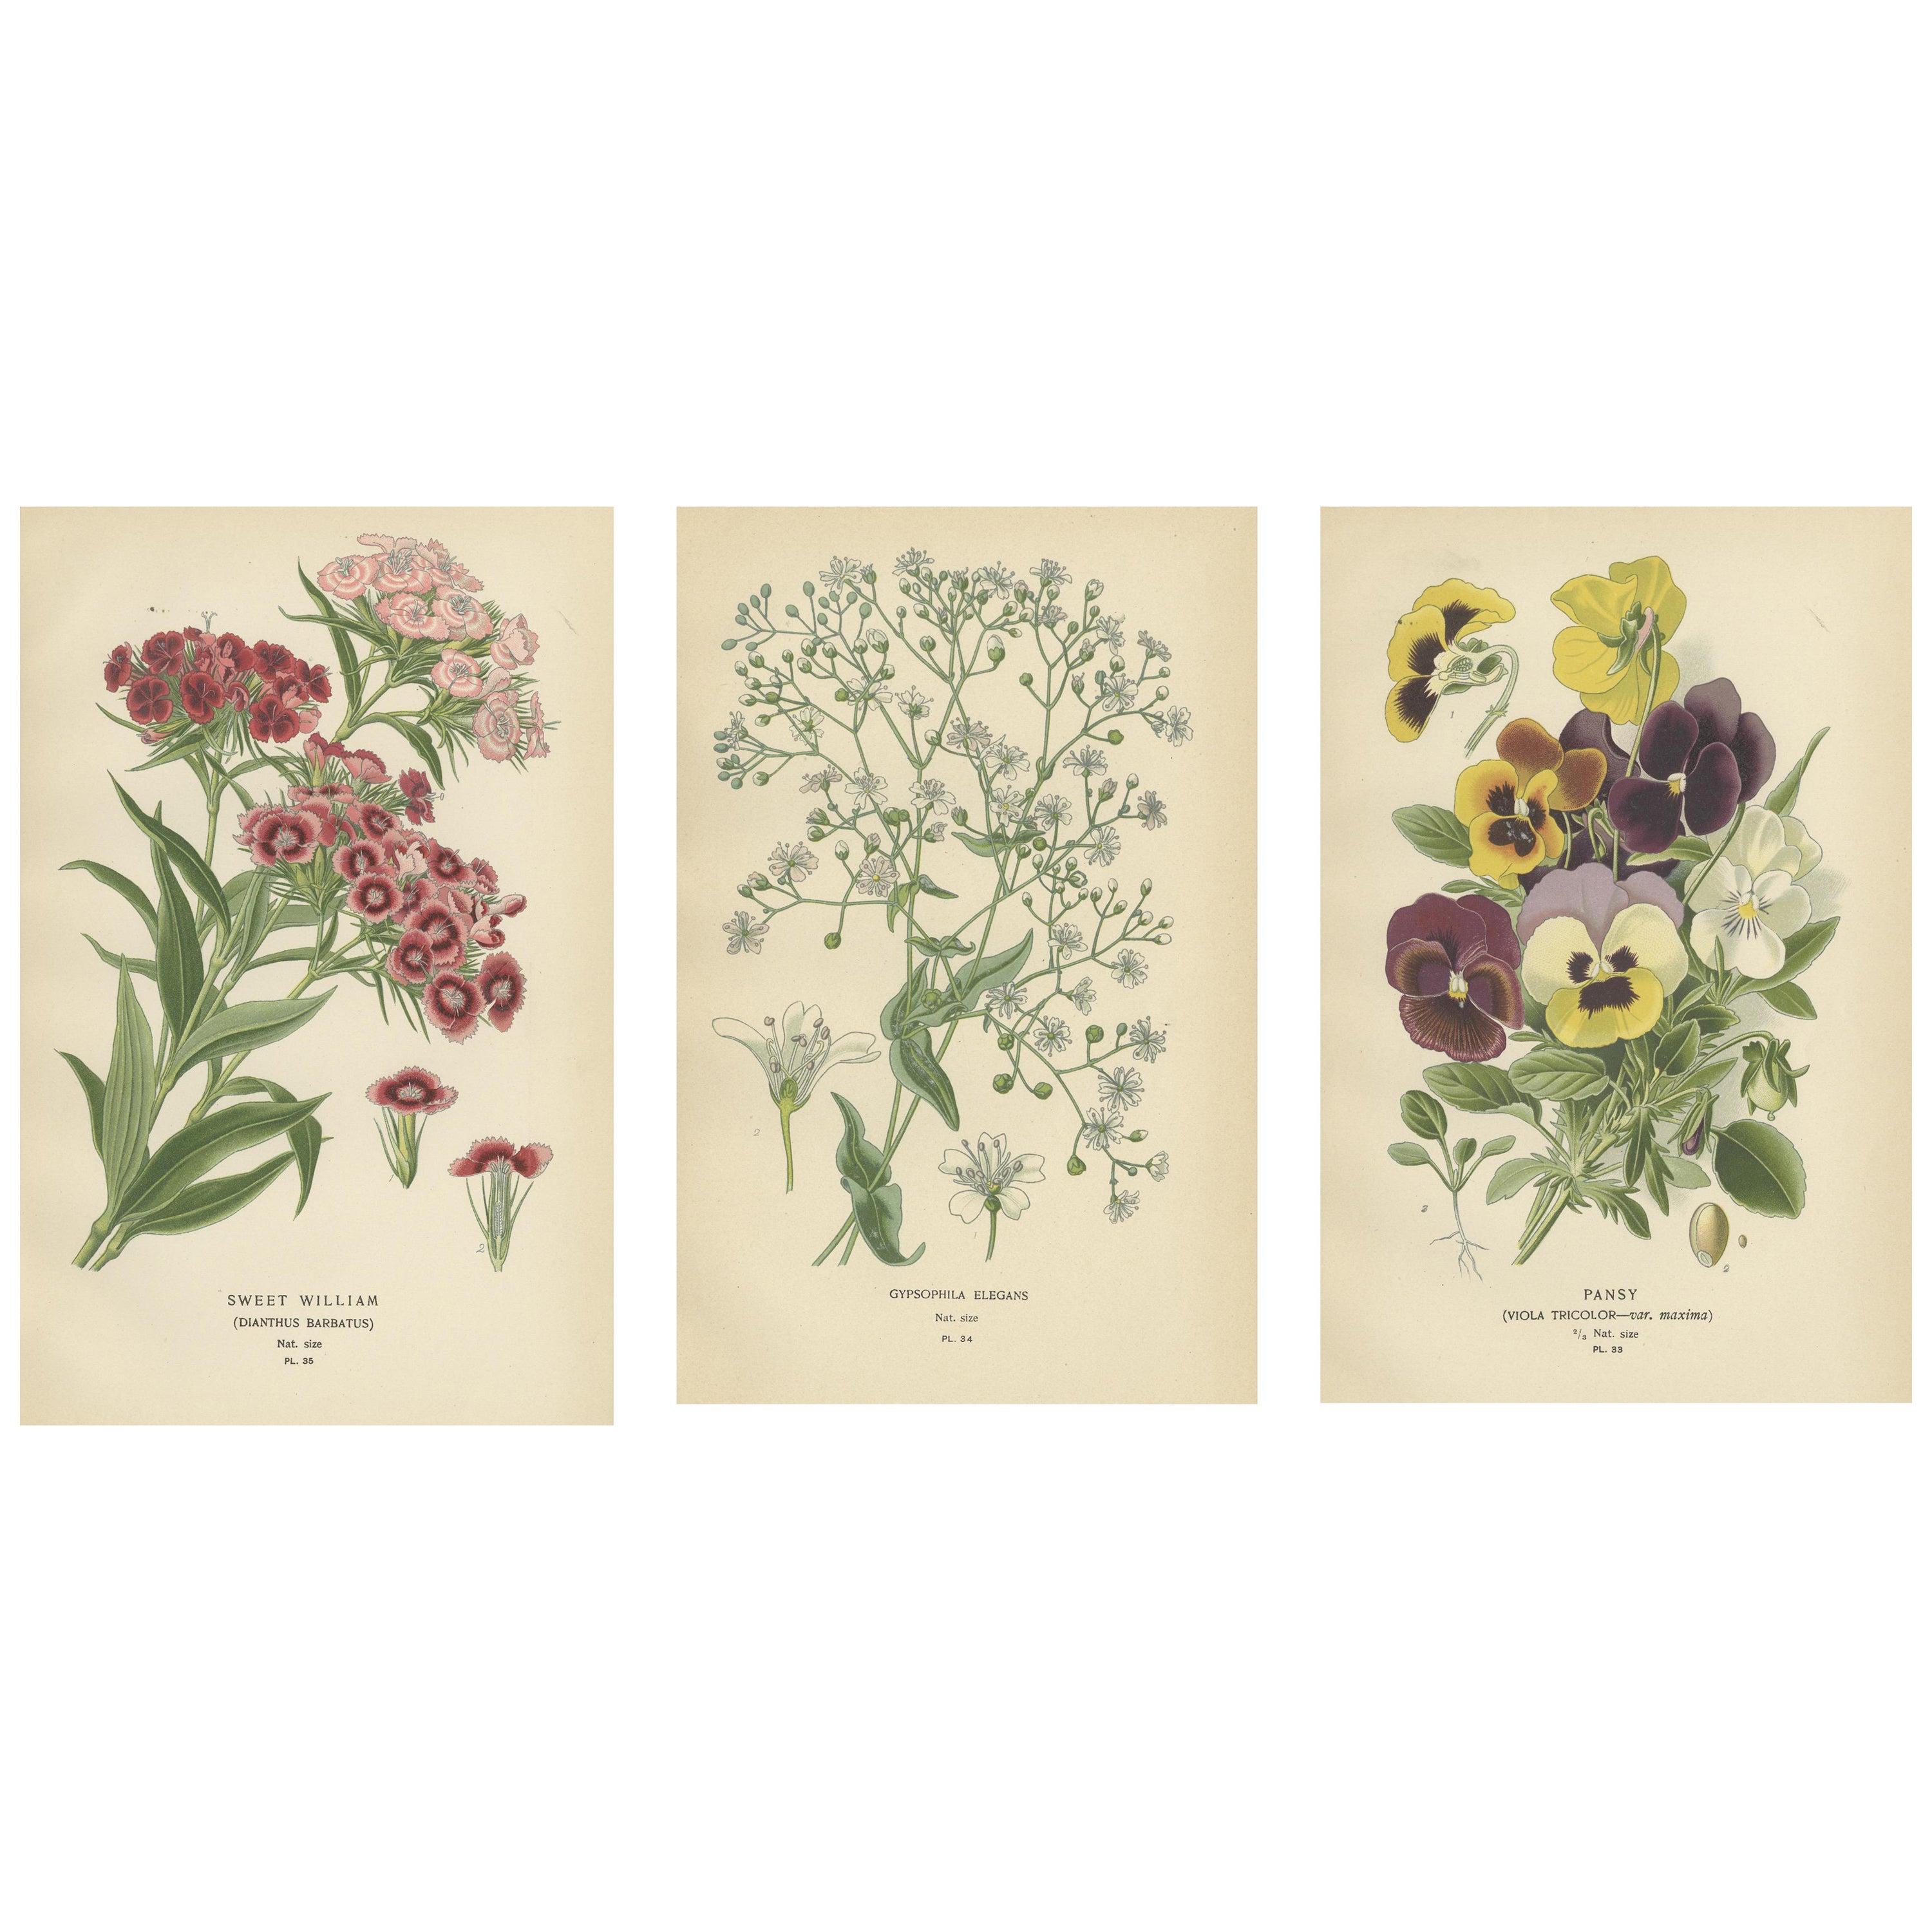 Vivids: A Floral Collection from Edward Step's Masterworks, 1896 